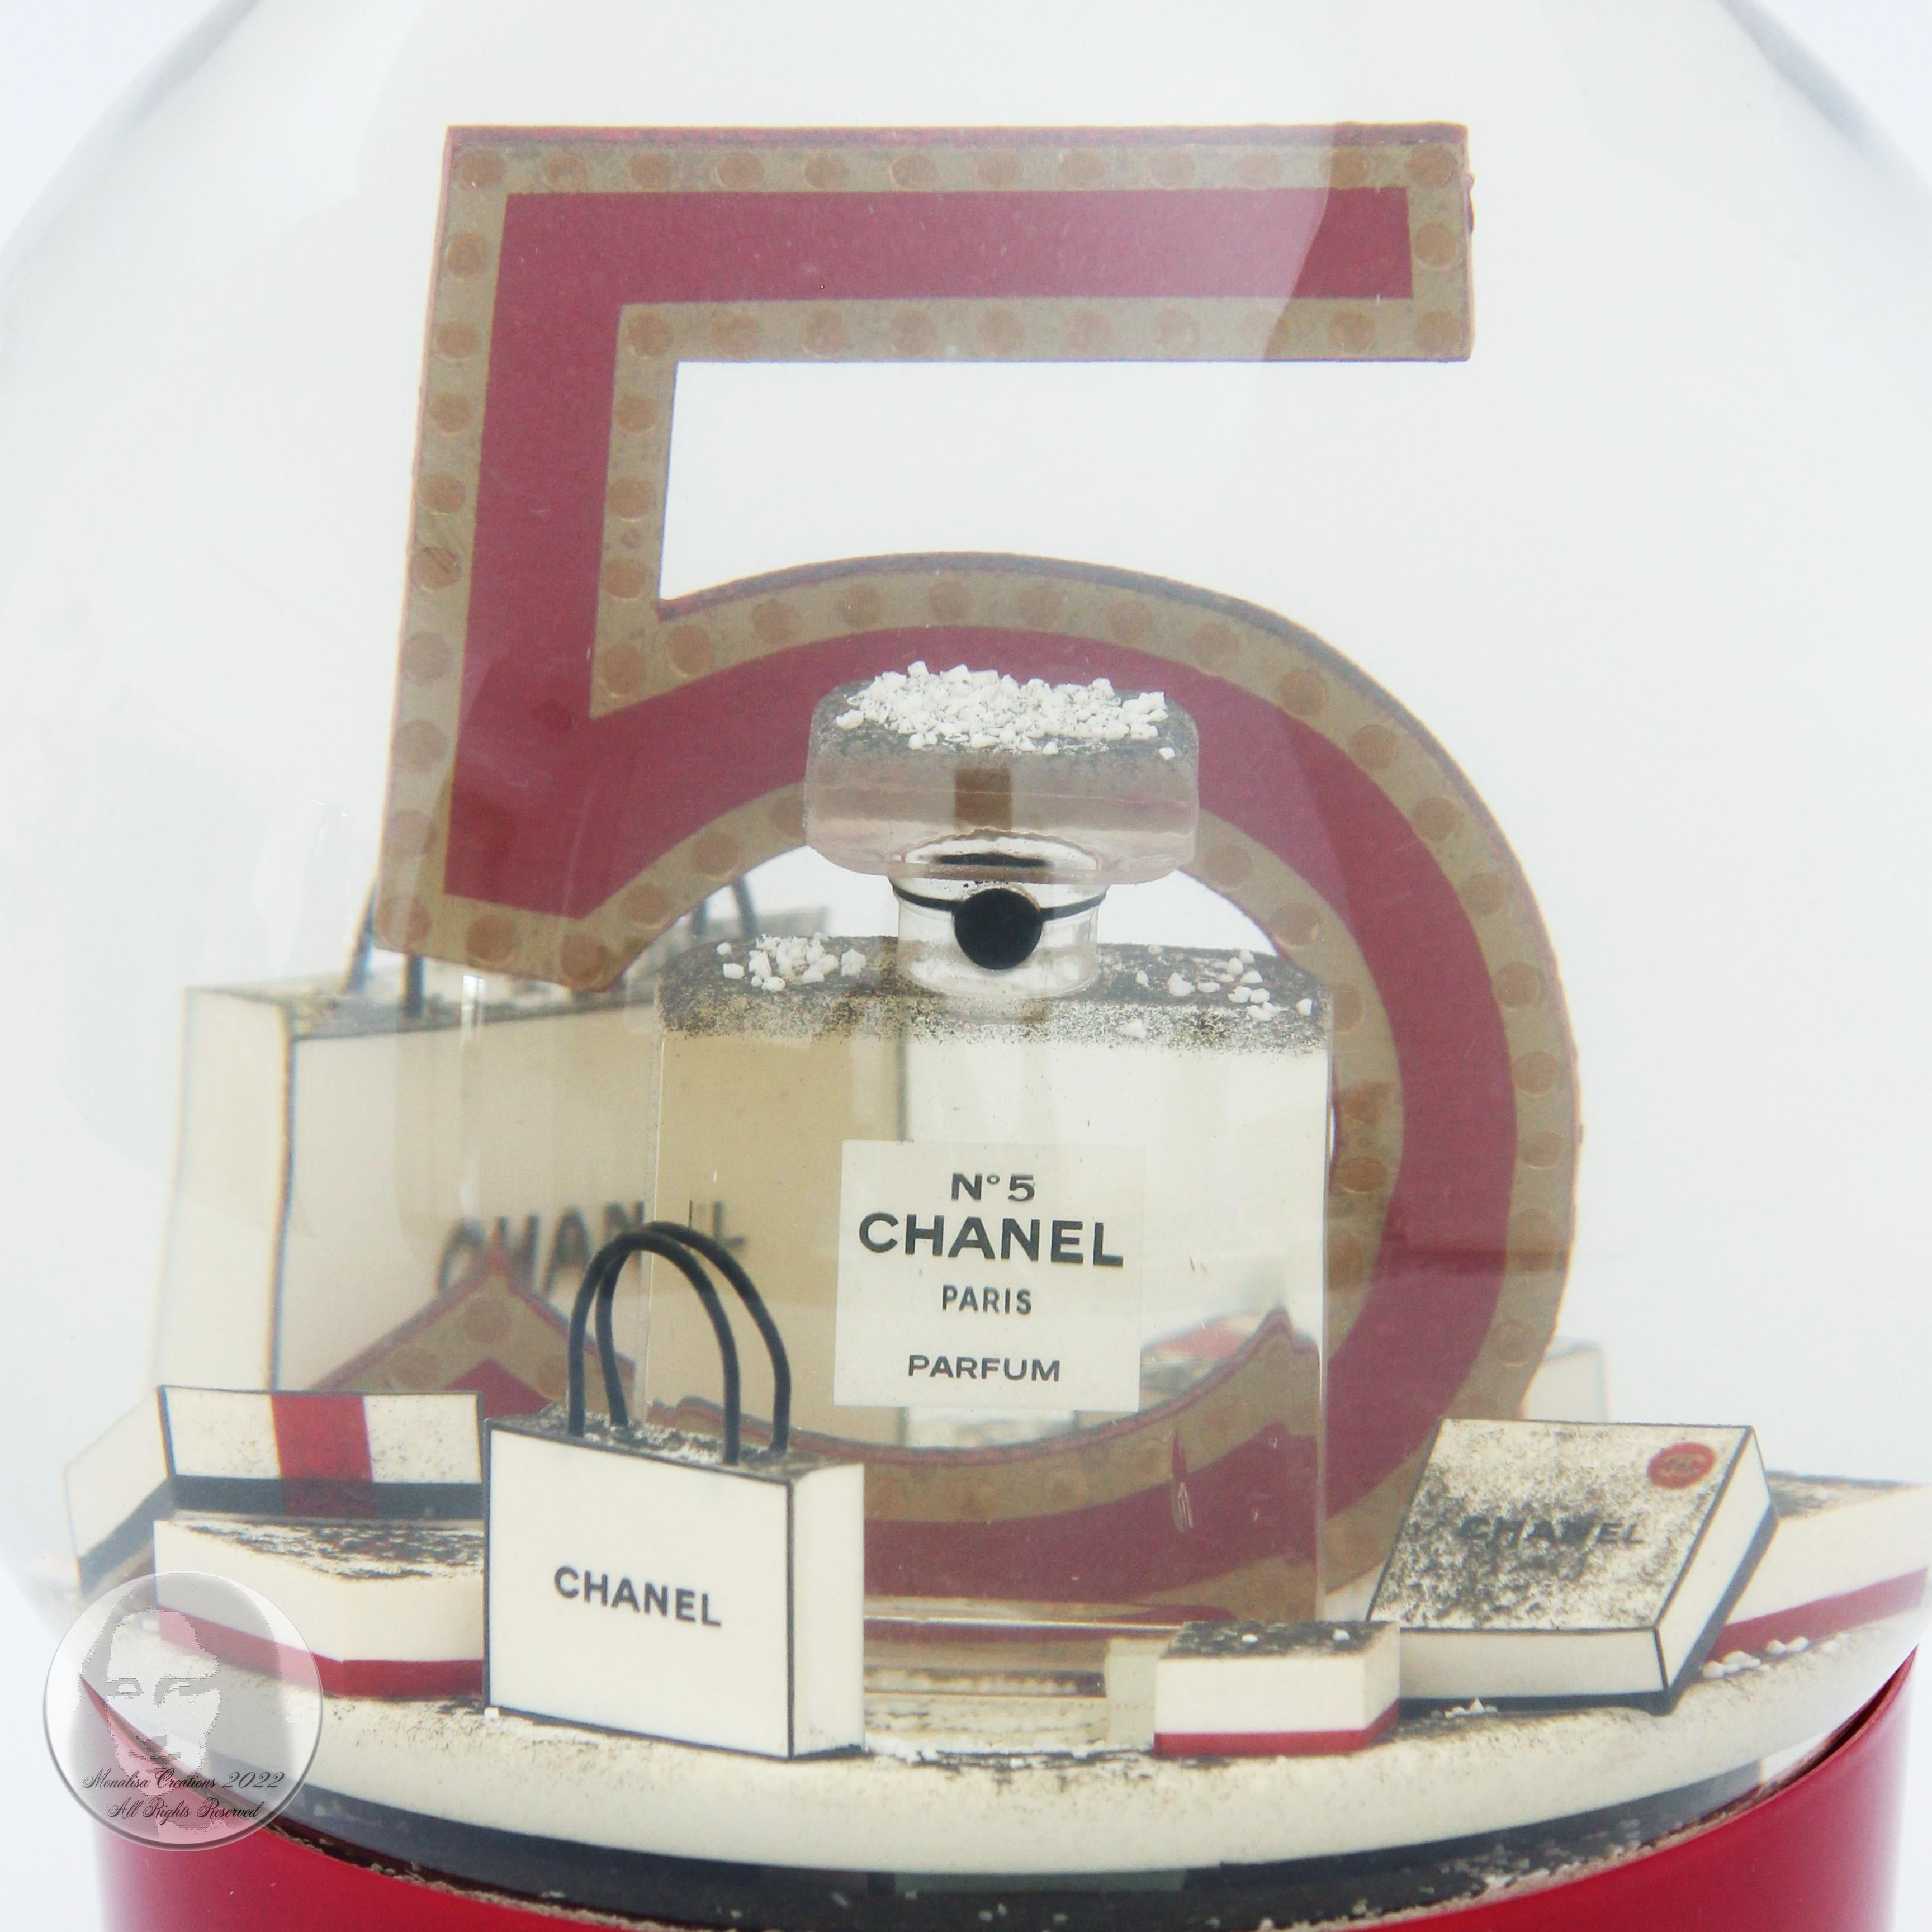 Chanel Snow Globe 2015 Large Shopping Bags No 5 Bottle Home Decor Limited in Box 4